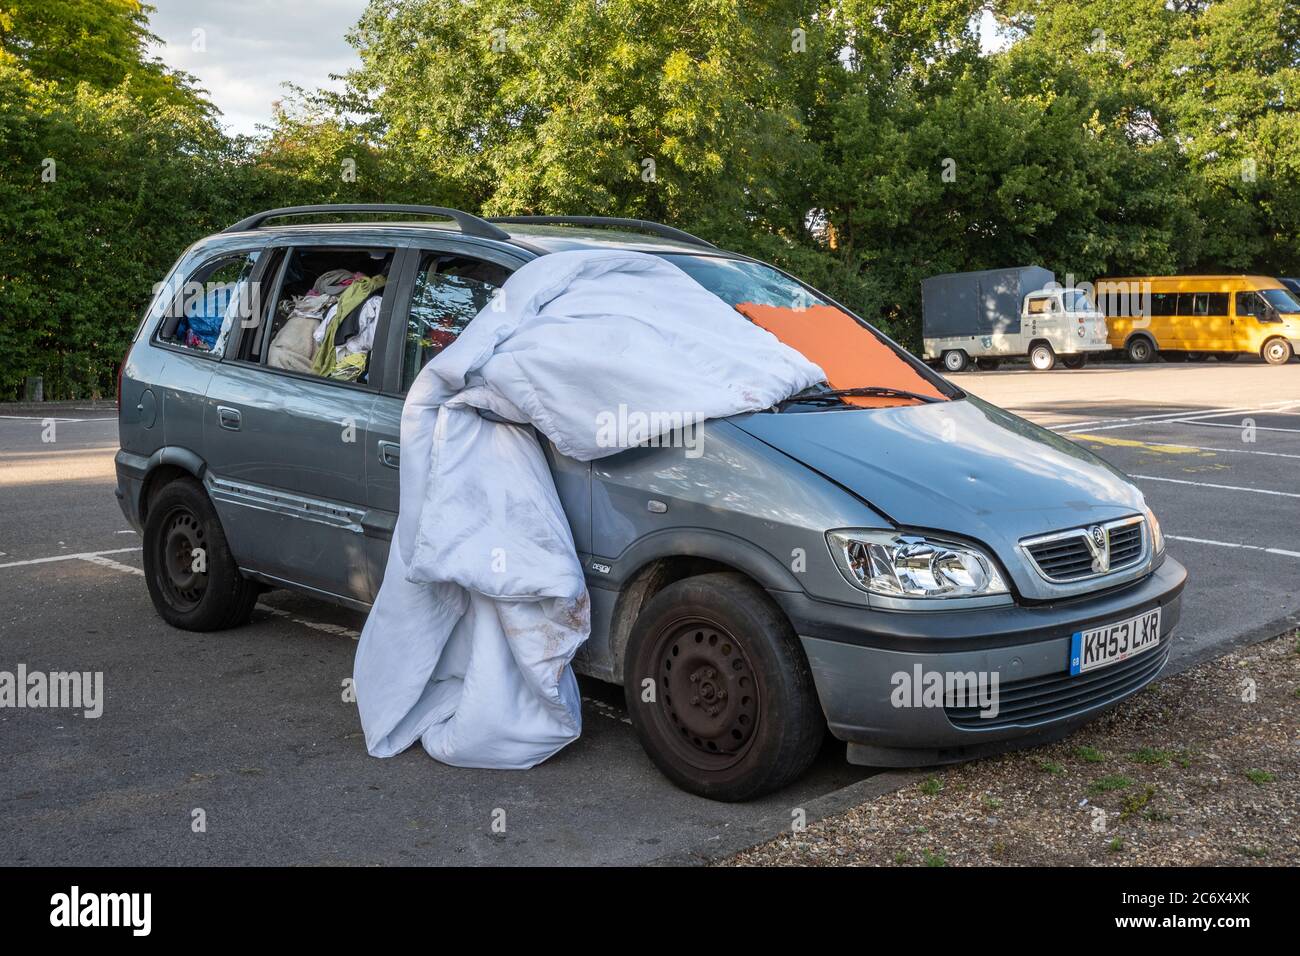 A car being lived in by a homeless person, full of clothes and belongings, with the front windscreen covered, UK Stock Photo